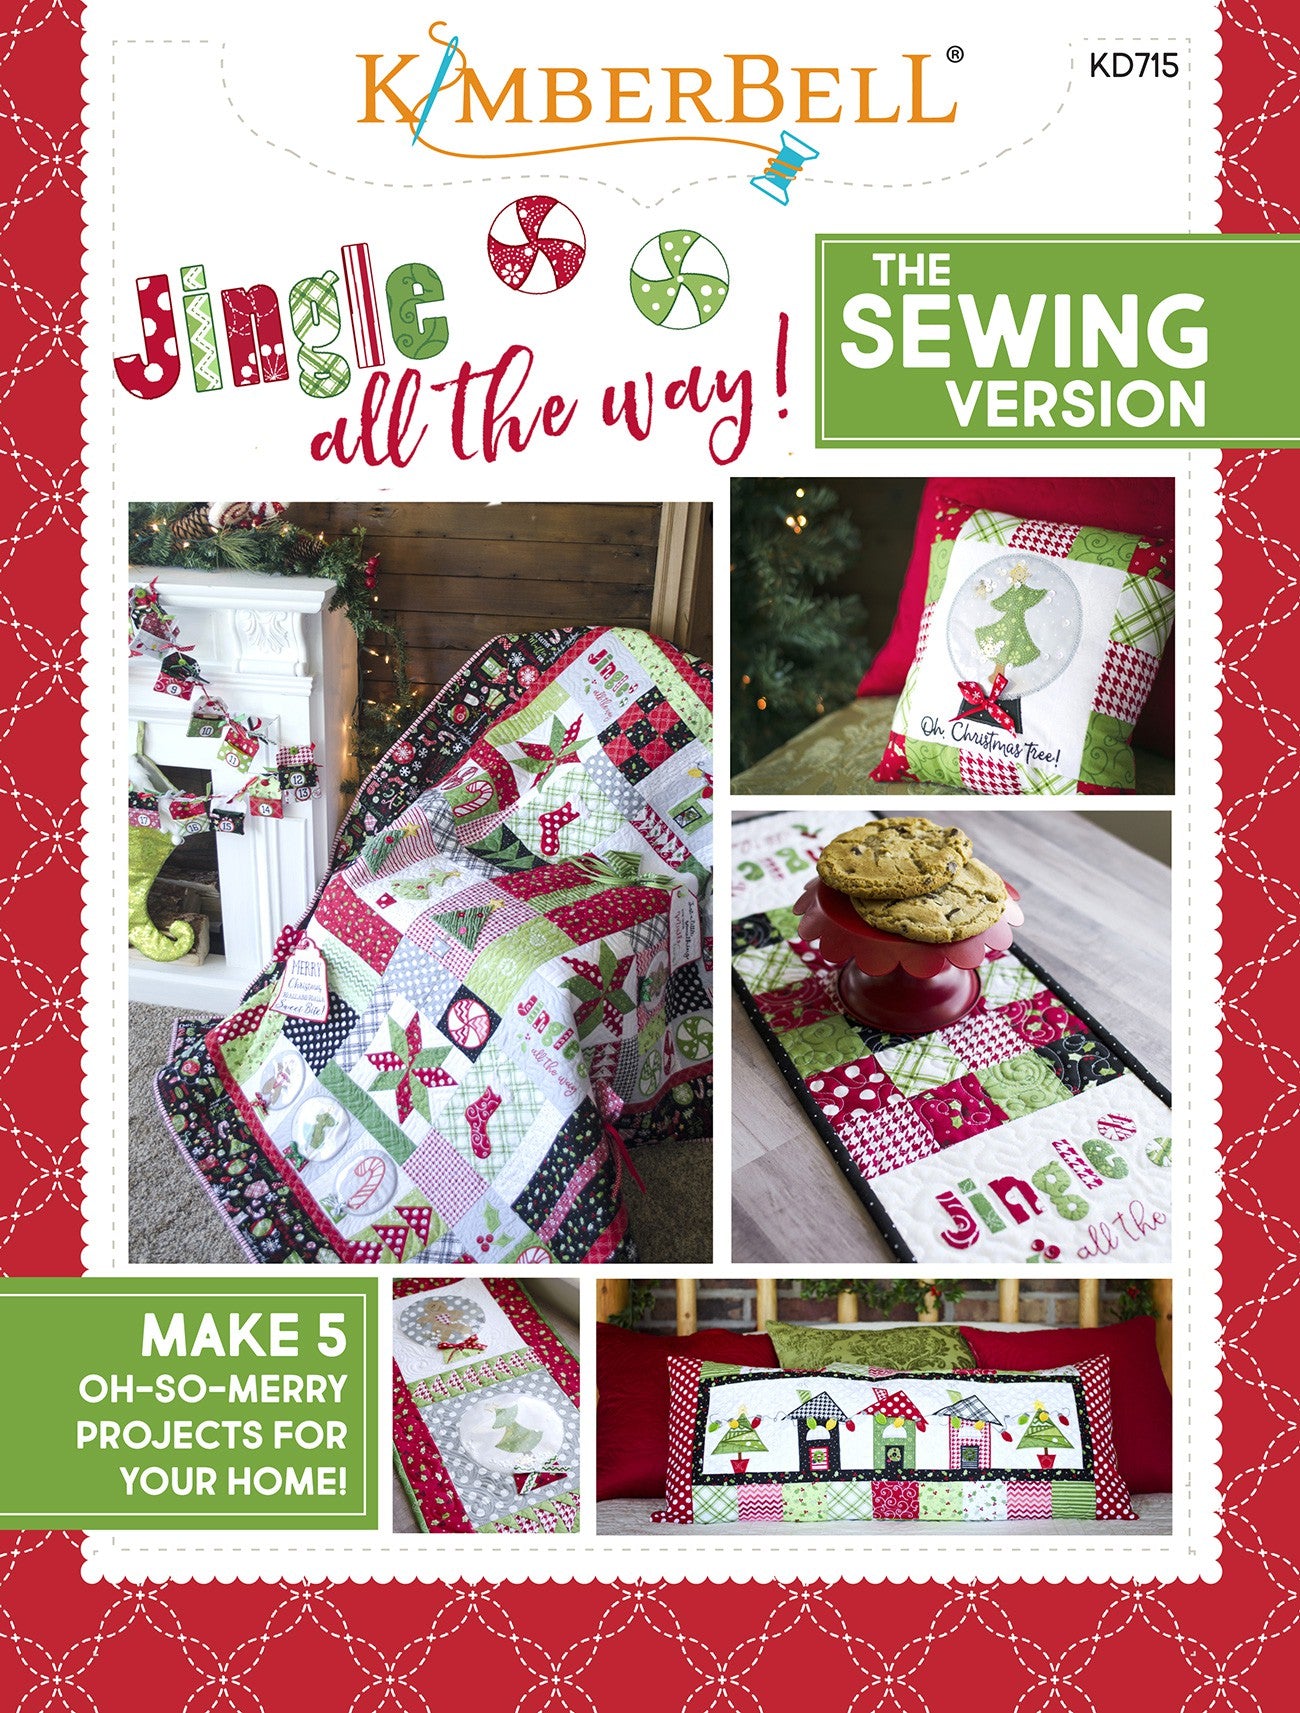 Kimberbell Jingle All the Way (The Sewing Version): Make 5 Oh-So-Merry Projects for Your Home